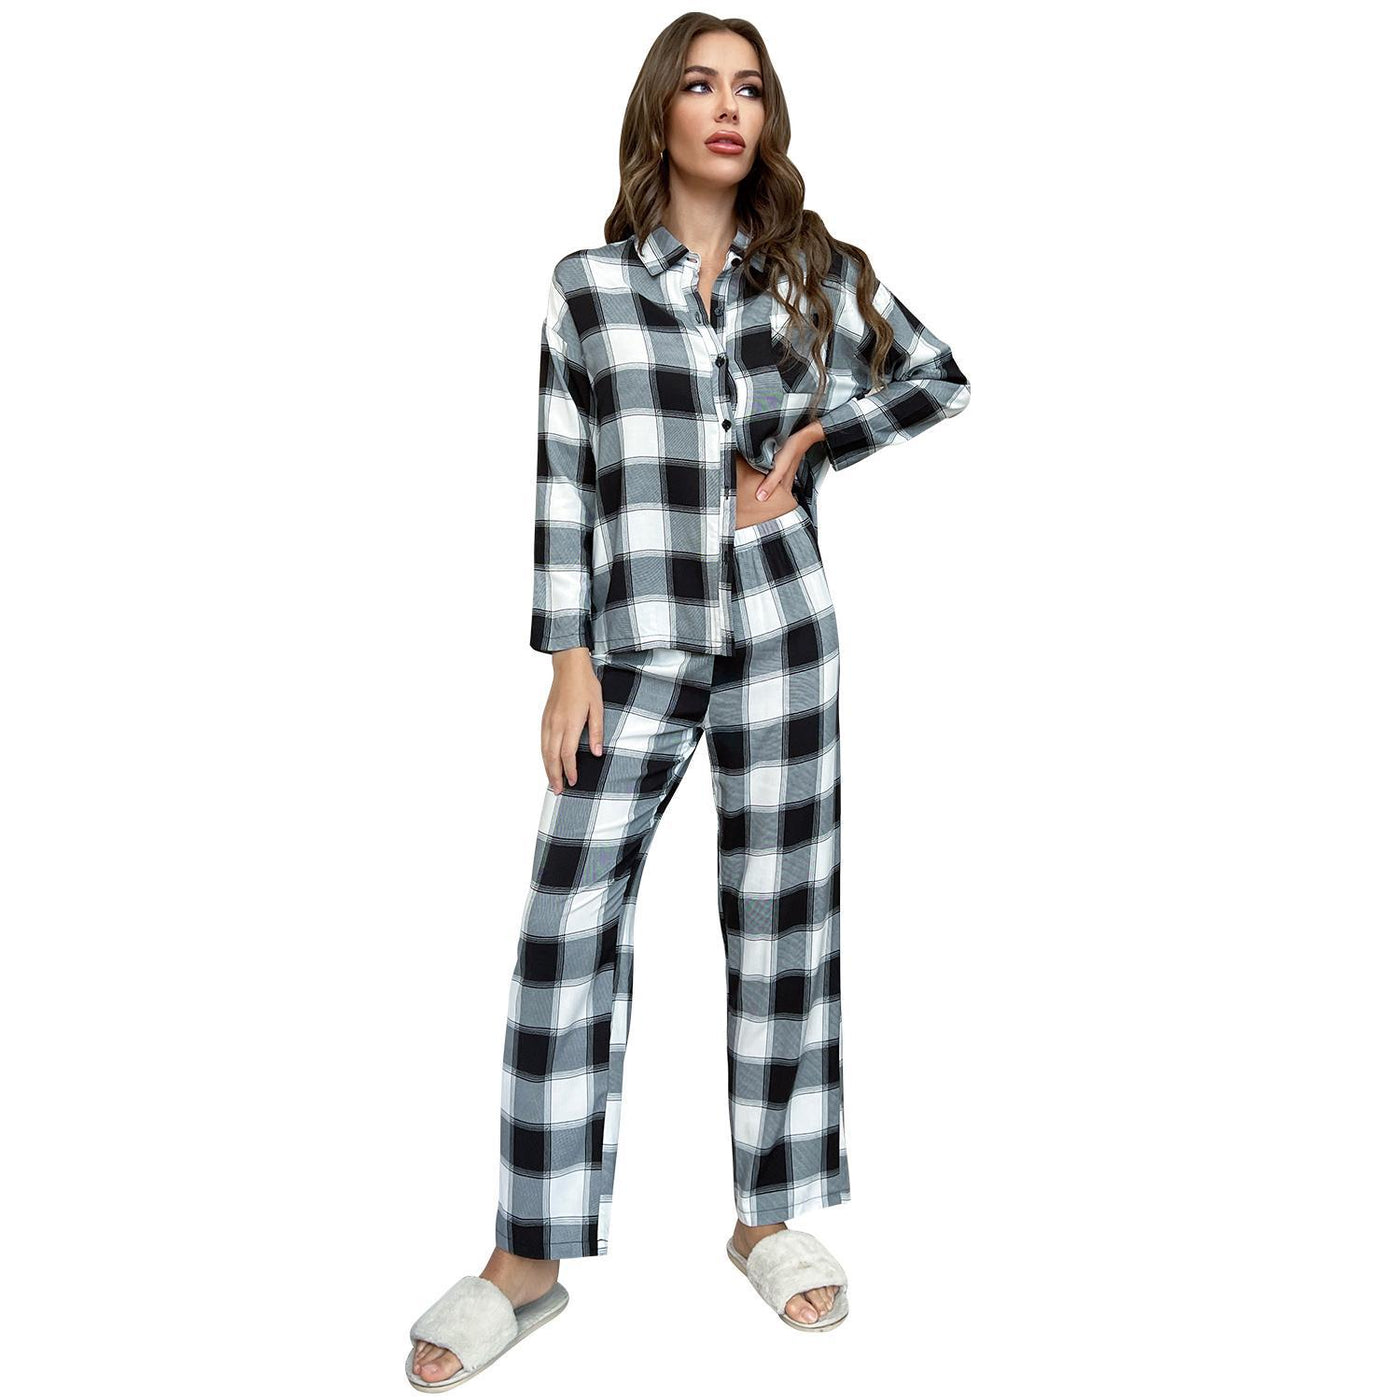 Pajamas Women's Spring And Autumn Plaid Long Sleeve Home Wear Suit